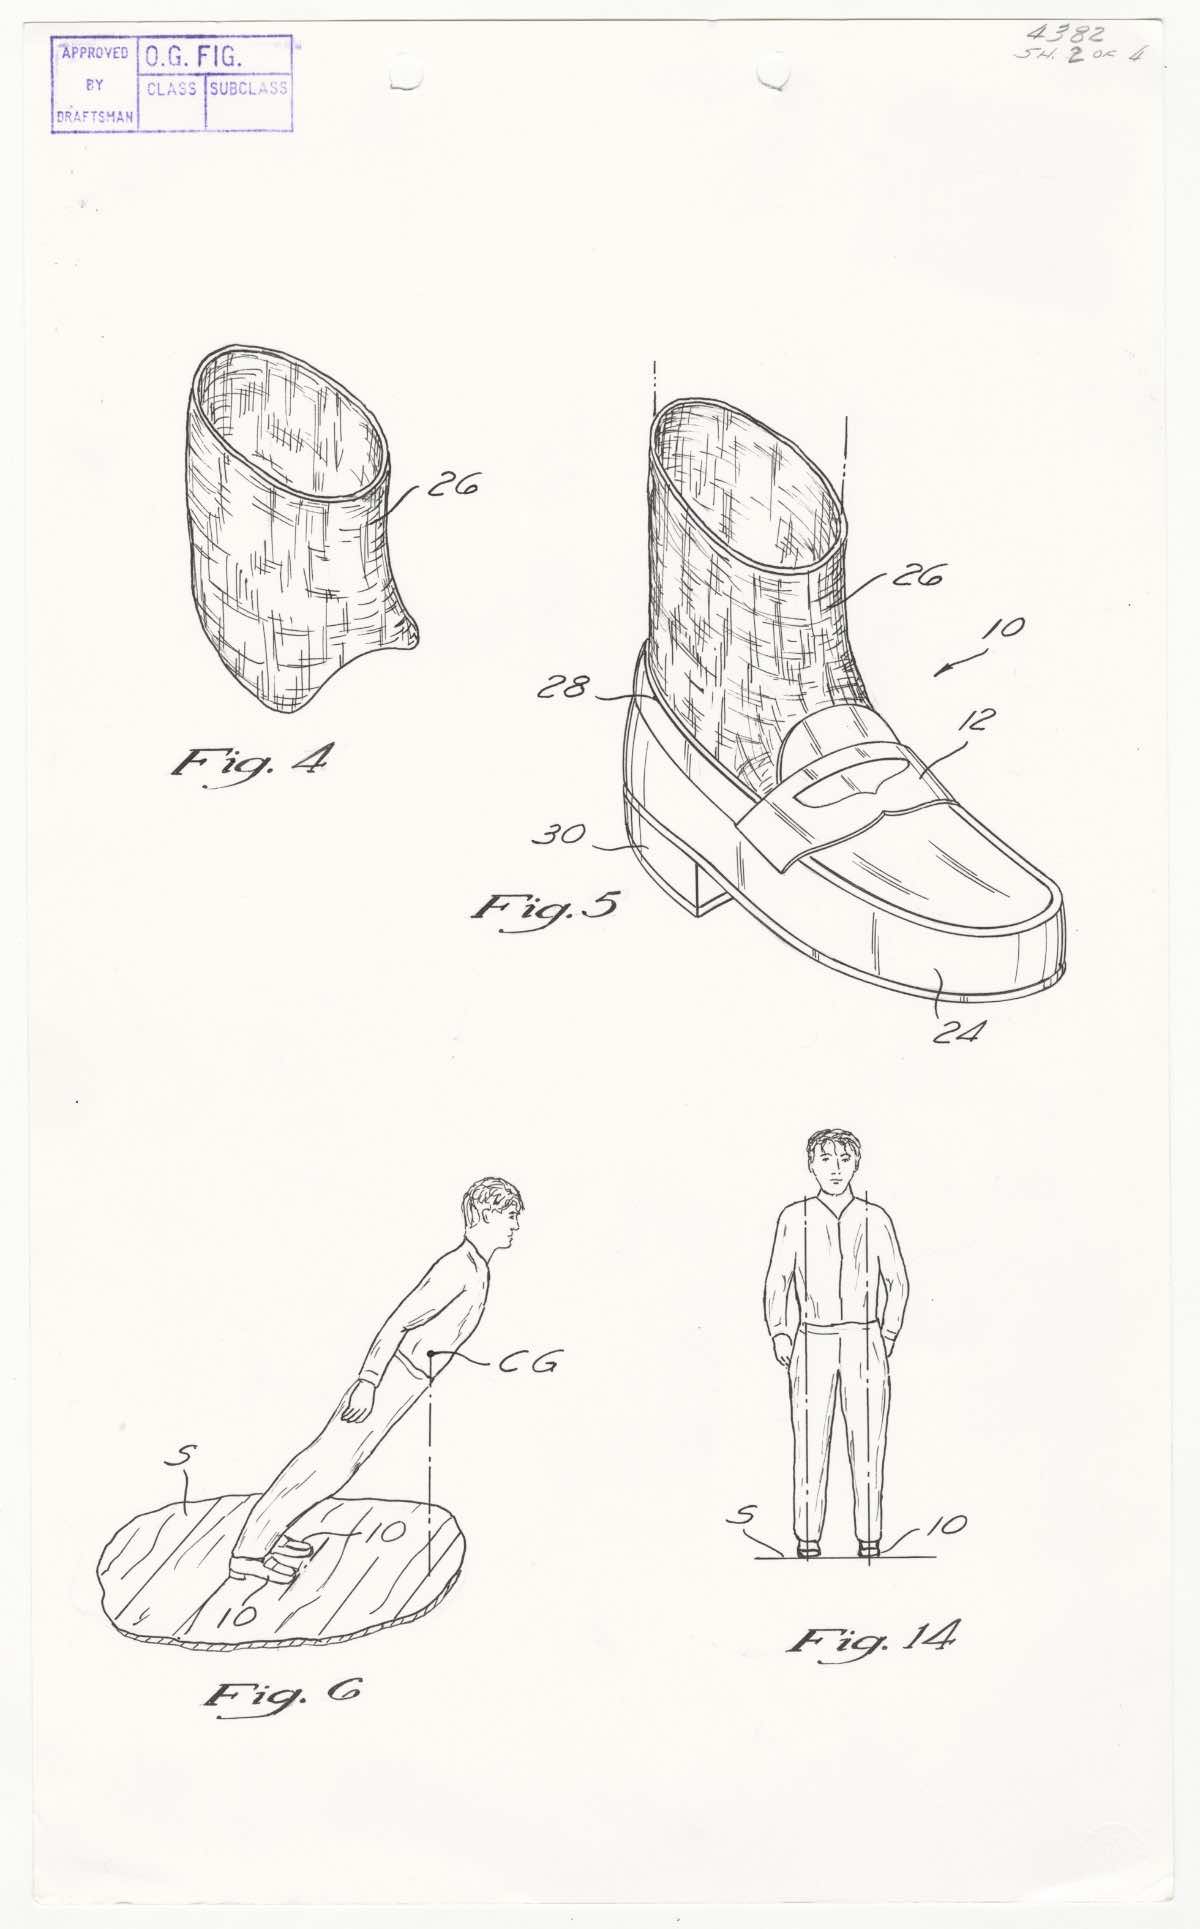 Patent Number 5,255,452 Michael Jackson's Anti-Gravity Illusion Shoes Selected Patent Case Files Record Group 241 Records of the Trademark and Patent Office HMS Container ID: HC1-90359313 HMS Item ID: HD1-90980612